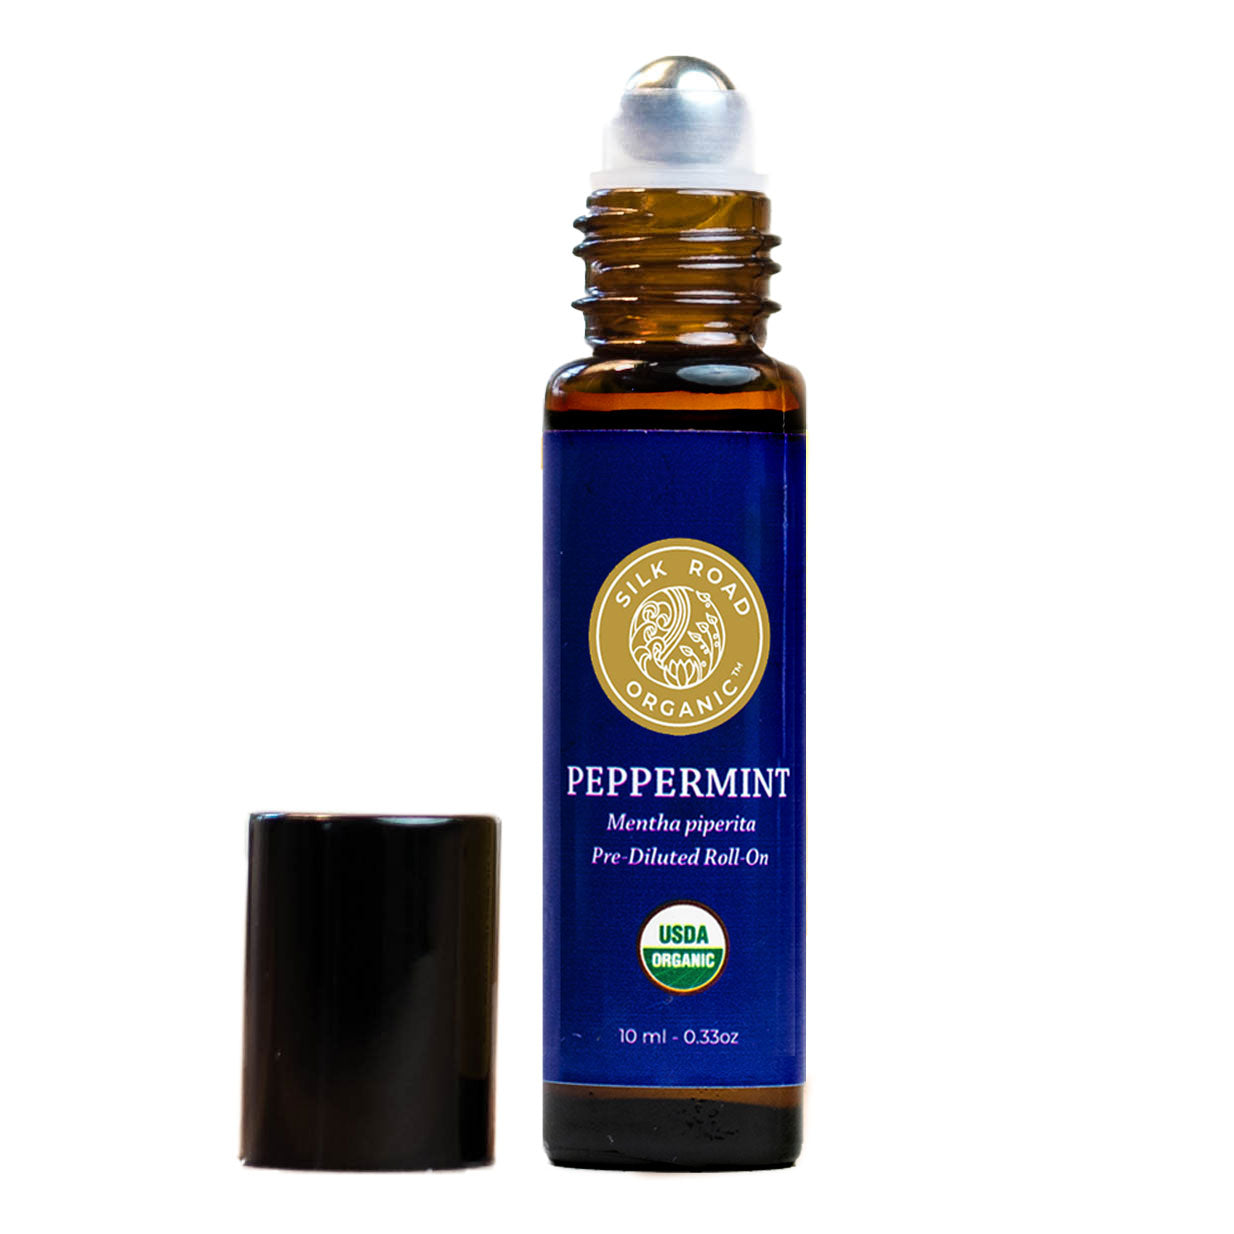 peppermint carry best holiday essential oil roller skin health silk road organic